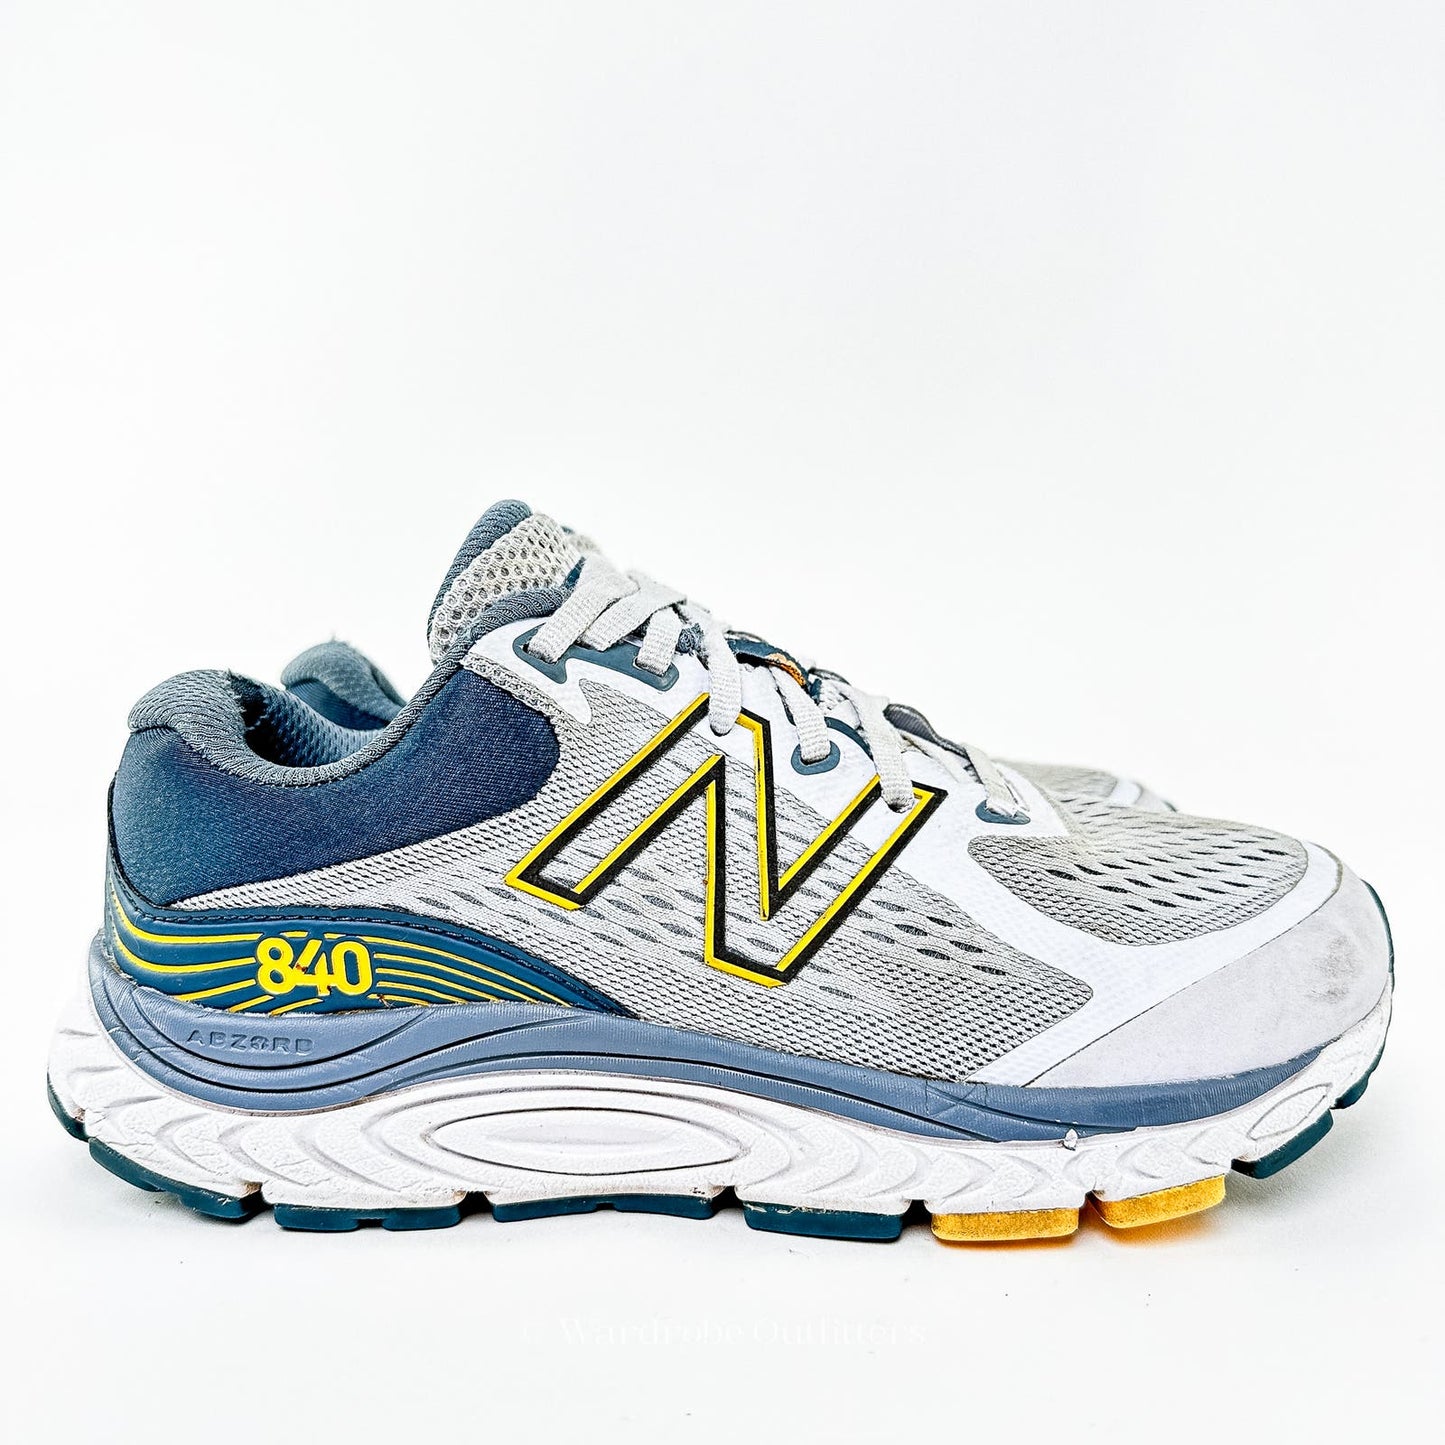 New Balance 840v5 2E Wide 'Silent Grey' Sneakers